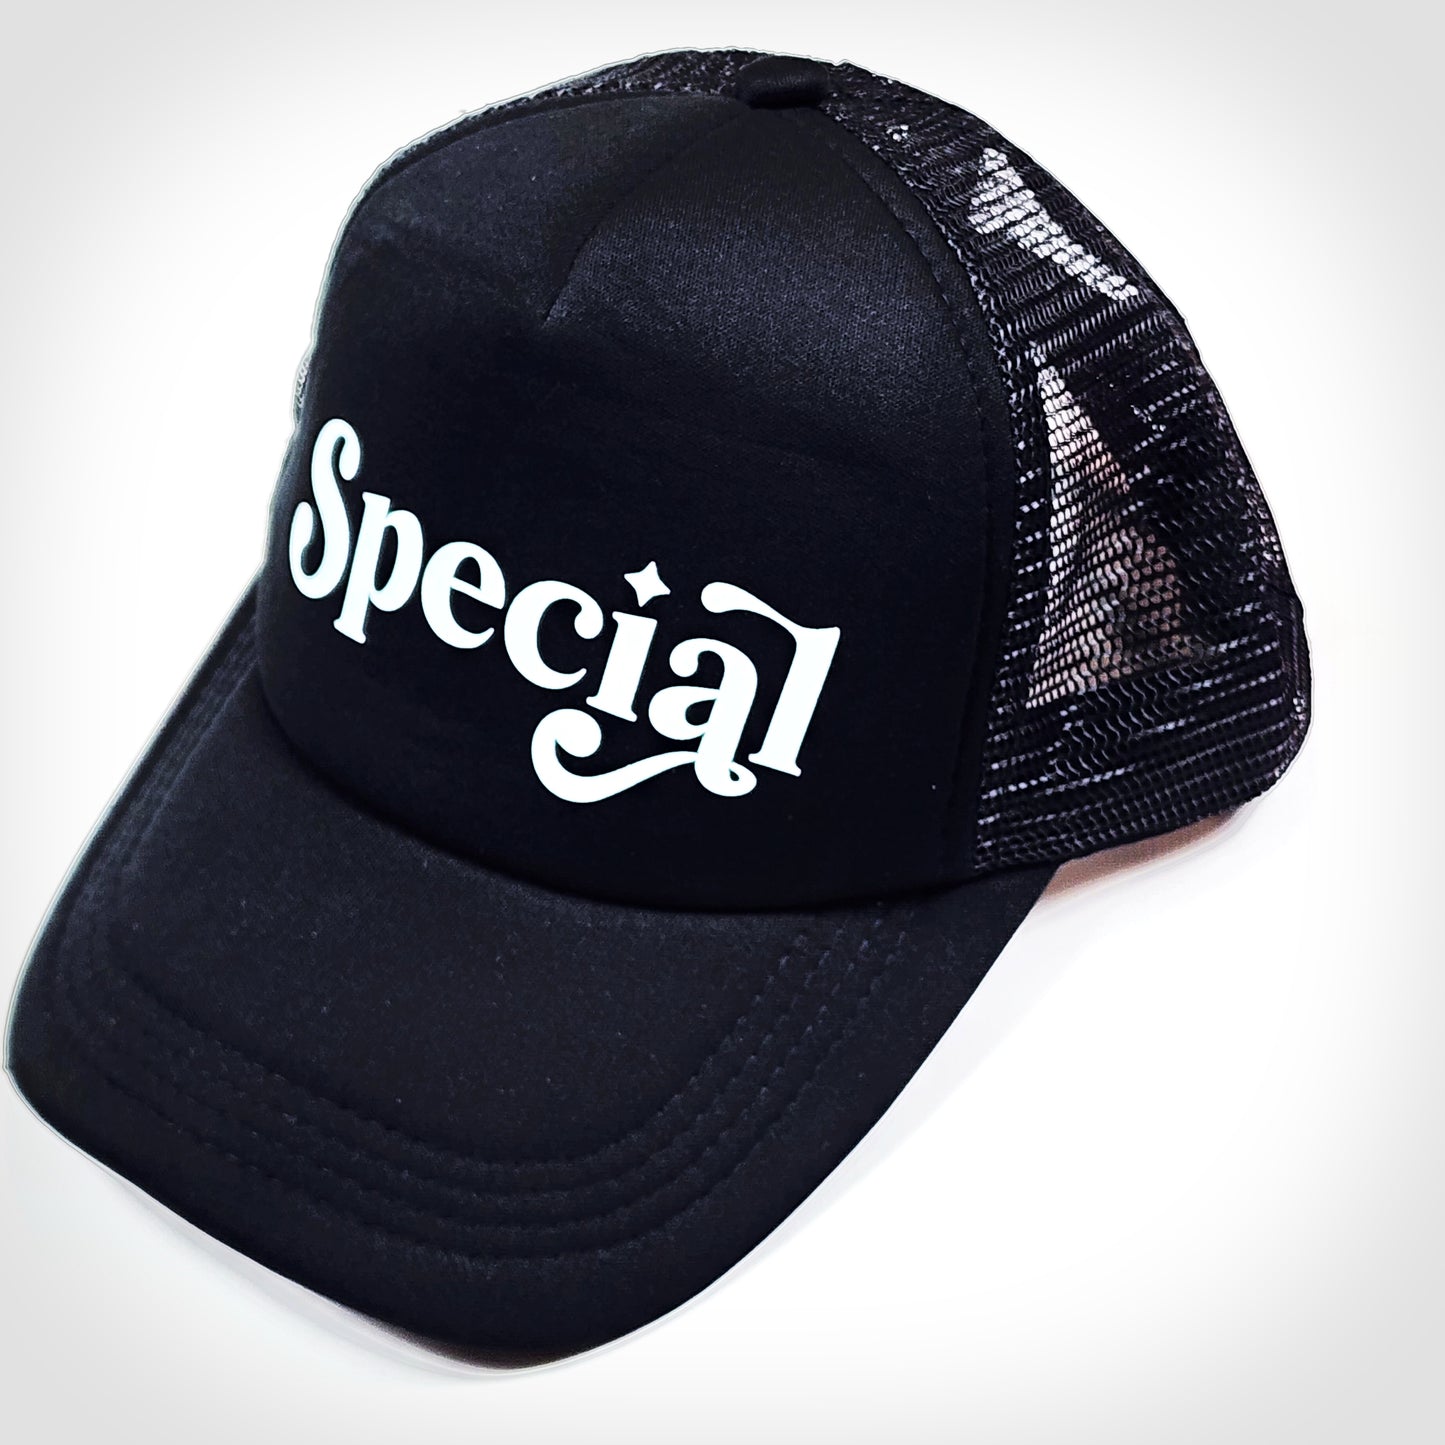 Special "Hat"